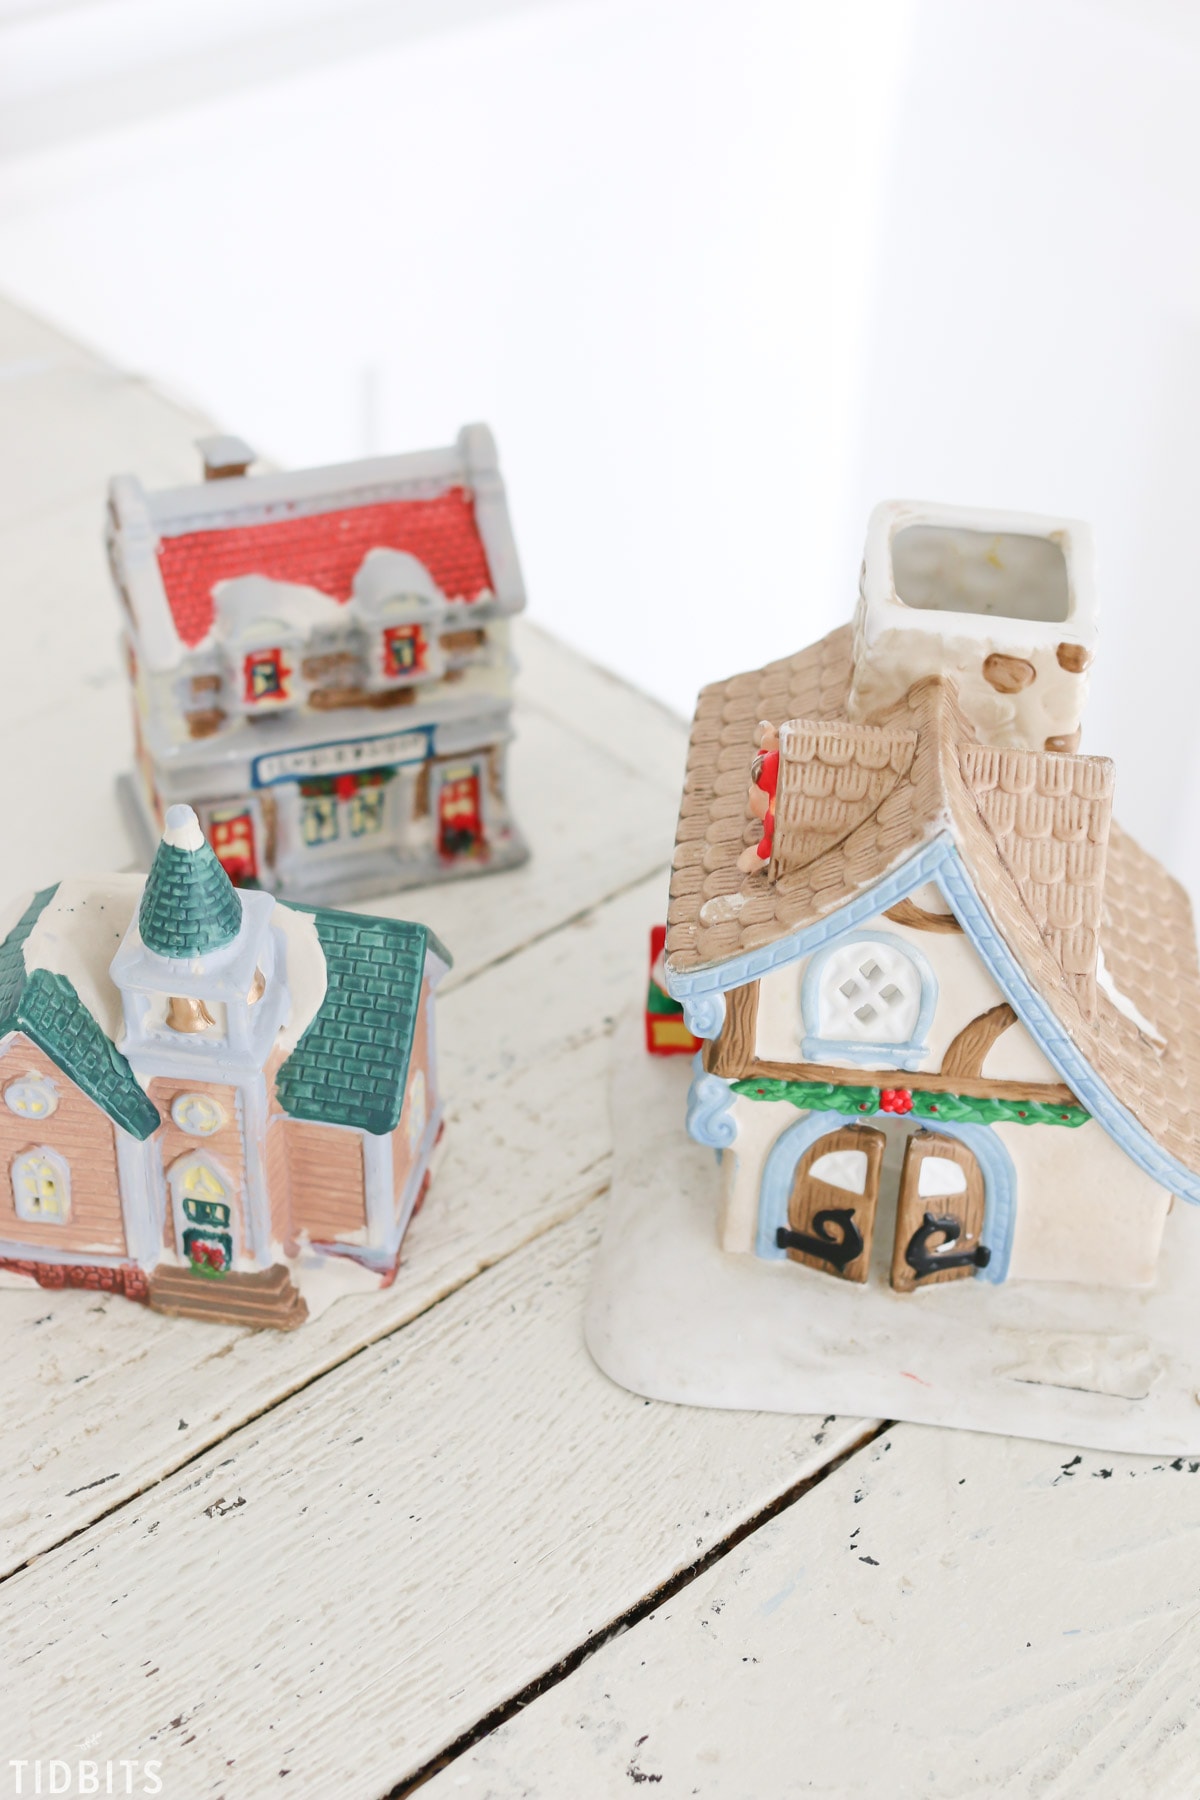 DIY Thrifted and Upcycled Glitter Putz Houses, by TIDBITS